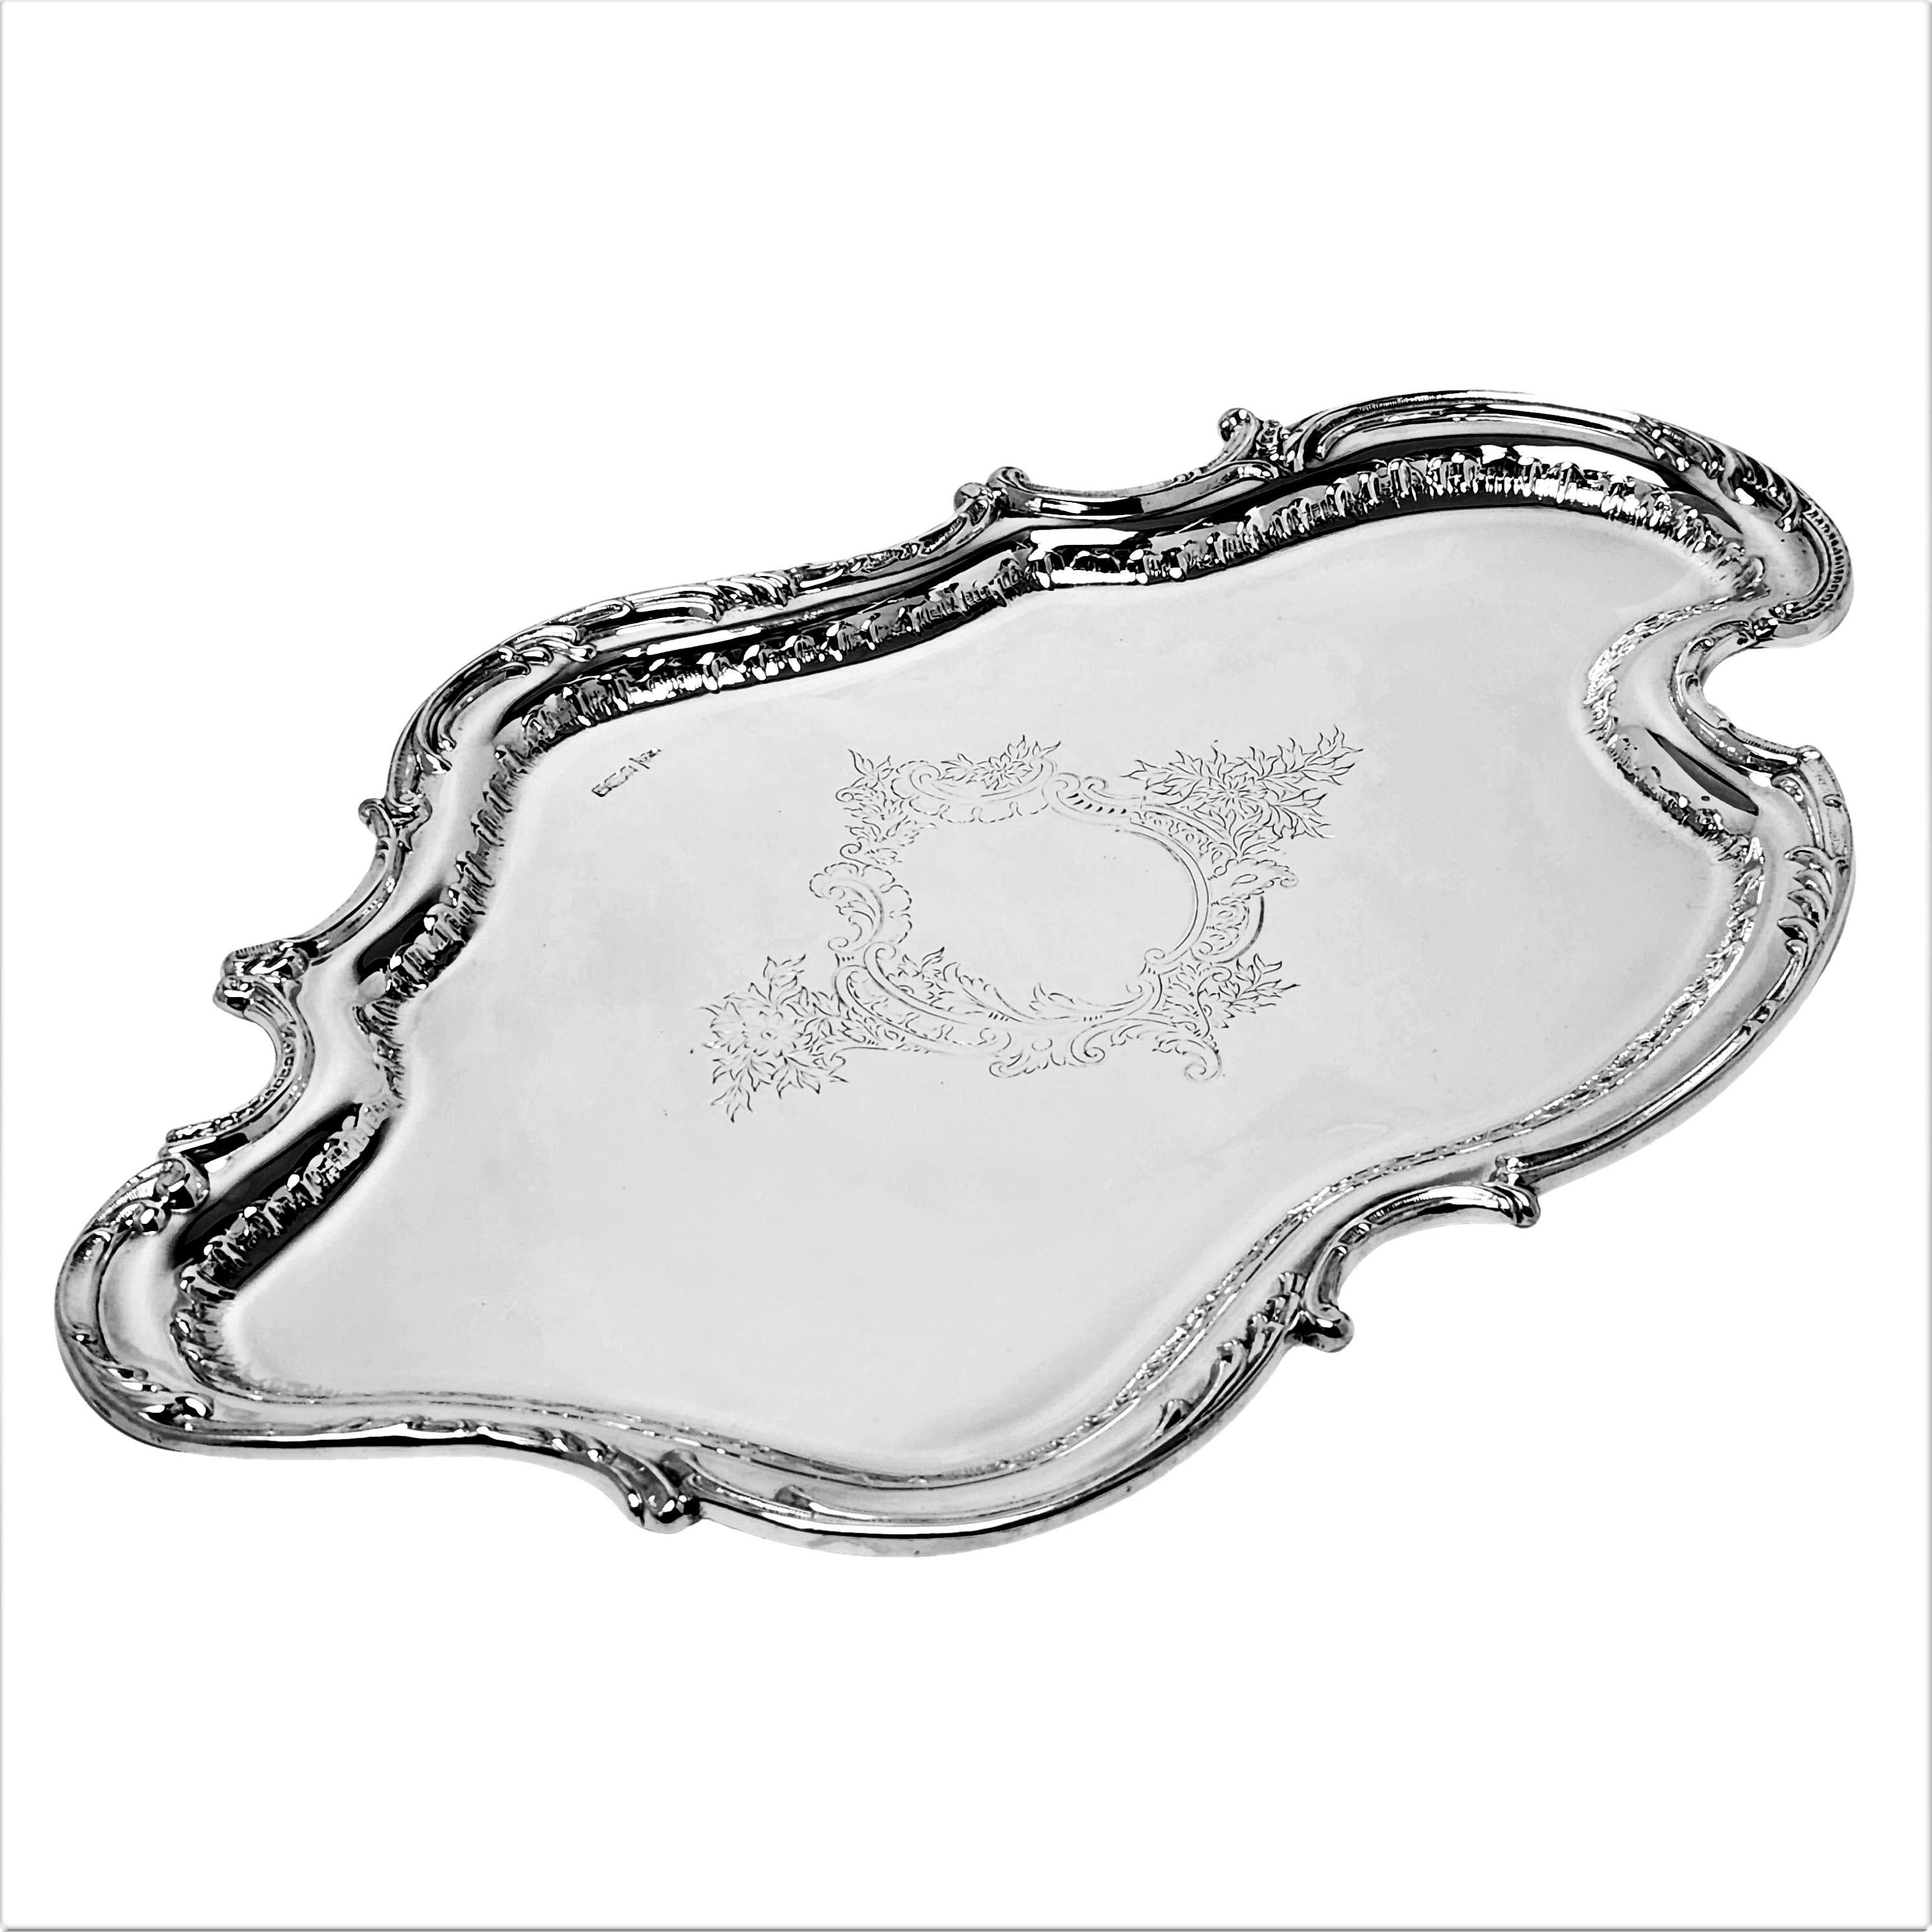 An elegant Antique solid Silver Salver with an unusual asymmetrical Rococo inspired cartouche shape. The Rim of the Tray is embellished with a chased border and an ornate engraved central cartouche. 

Made in Sheffield, England in 1902 by Walker &